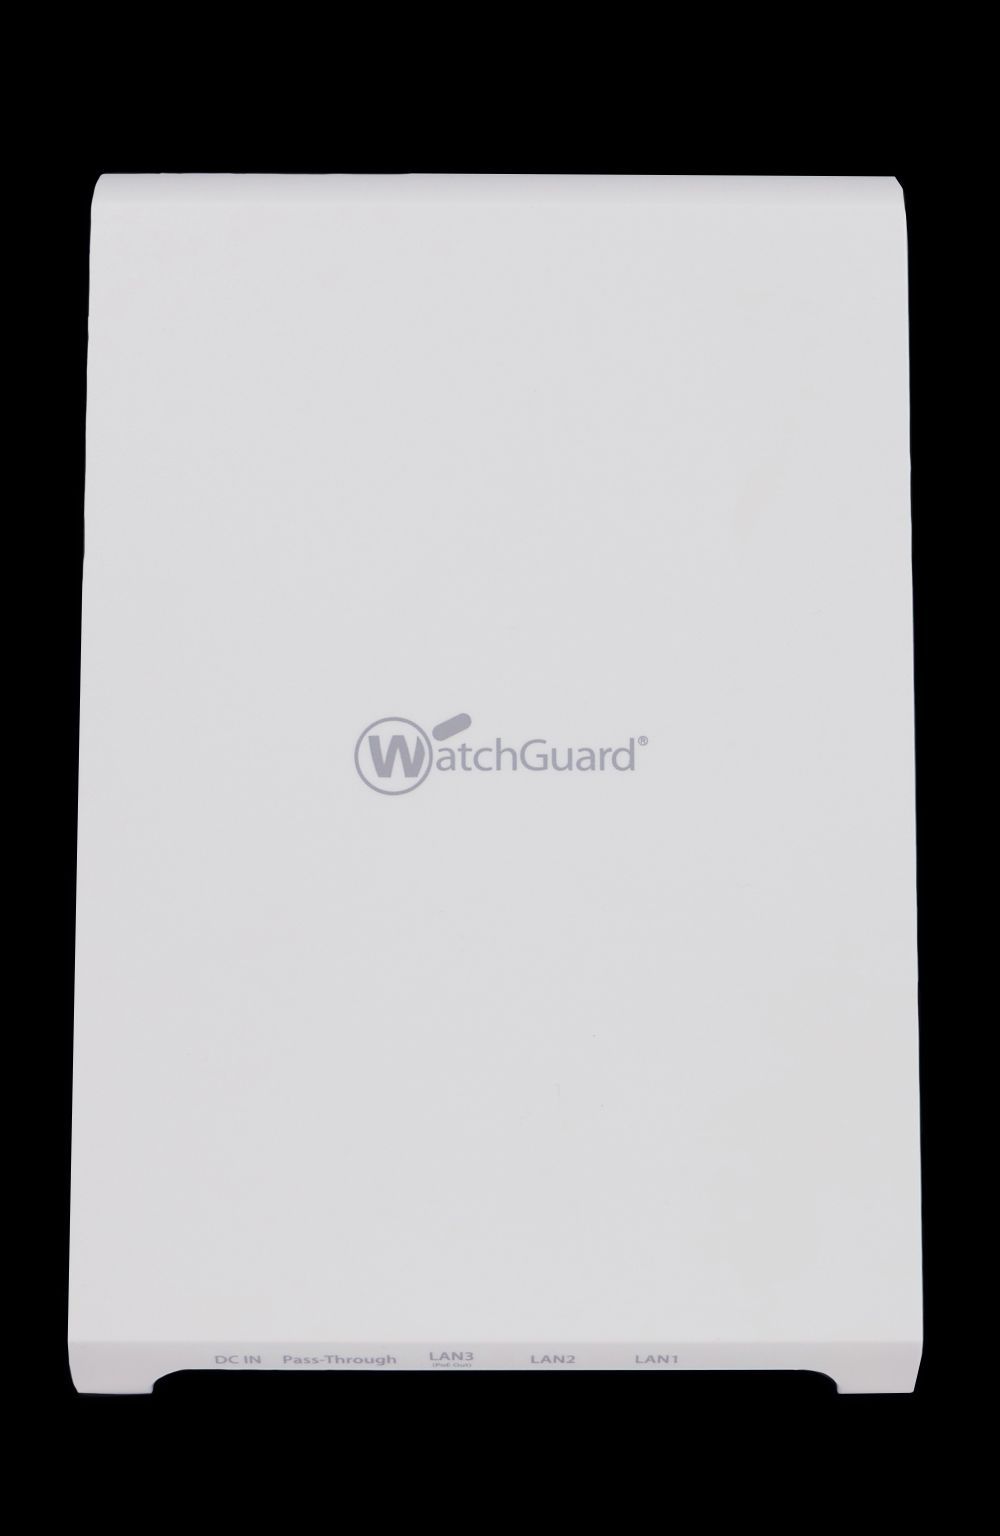 WatchGuard AP225W, Competitive Trade In to WatchGuard AP225W and 3-yr Total Wi-Fi